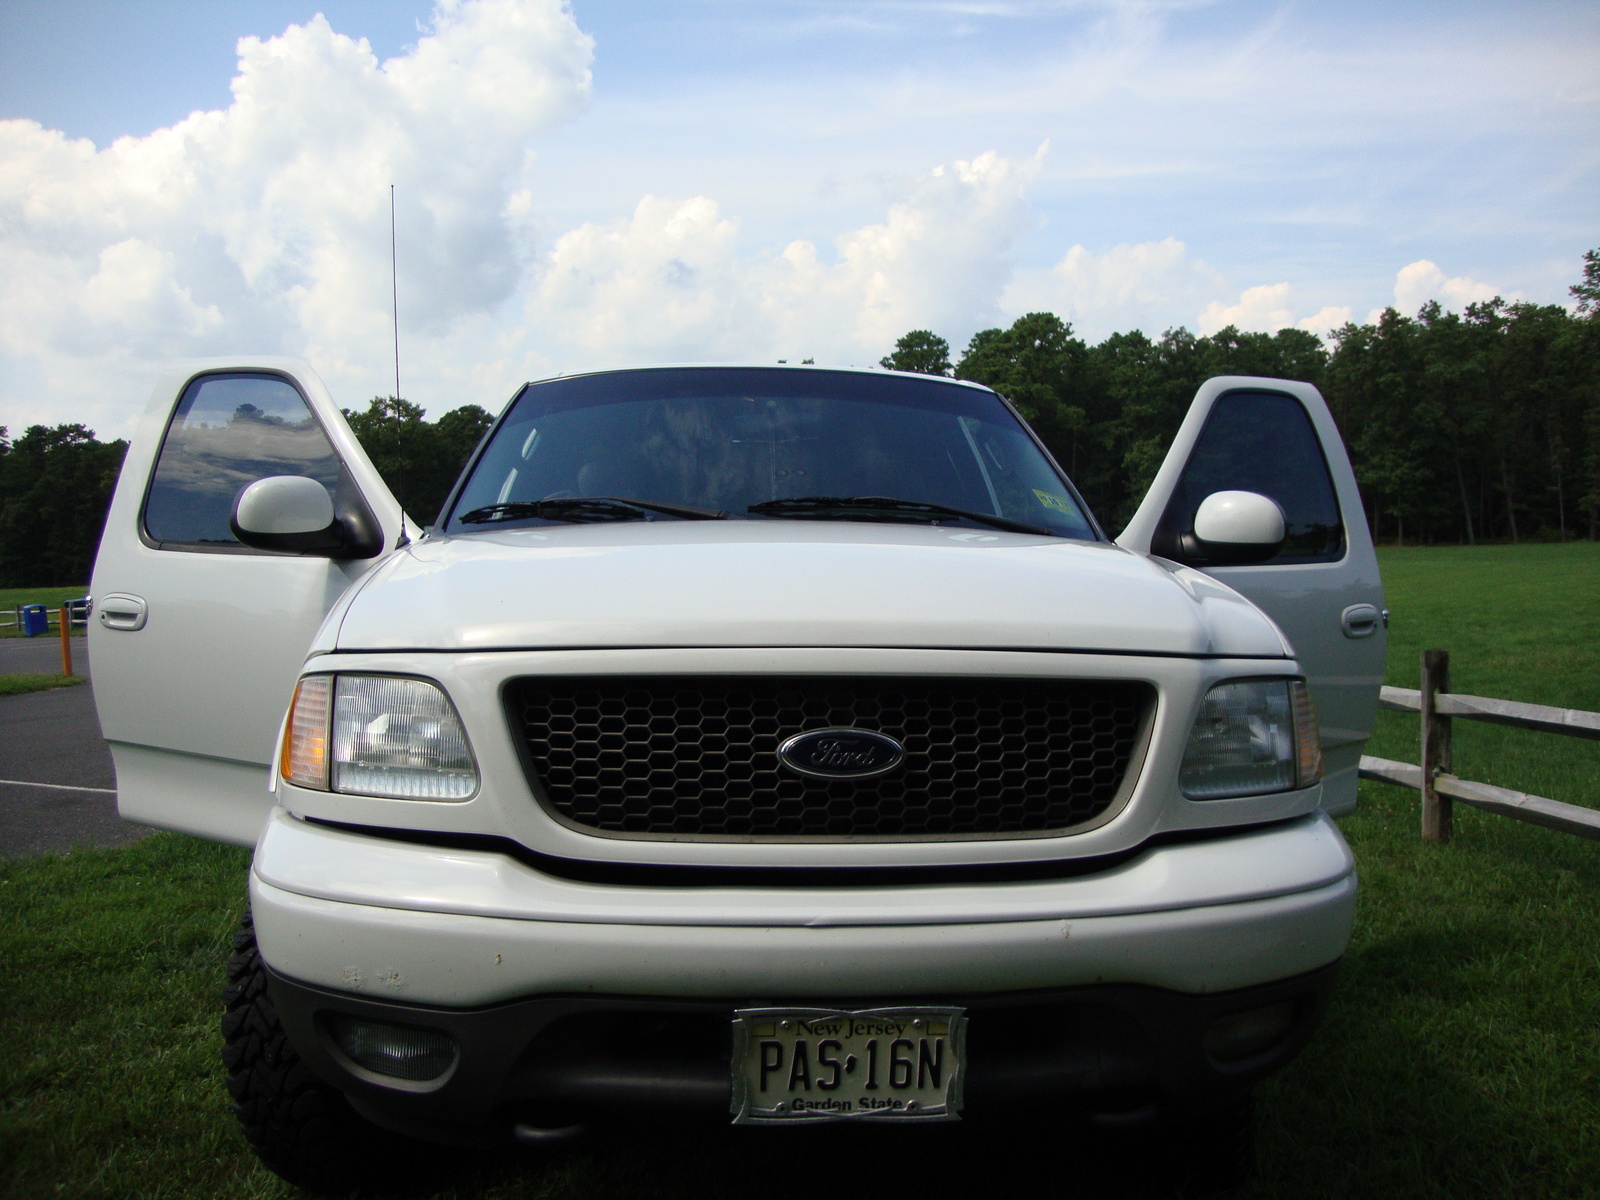 2004 Ford f150 heritage reviews #4